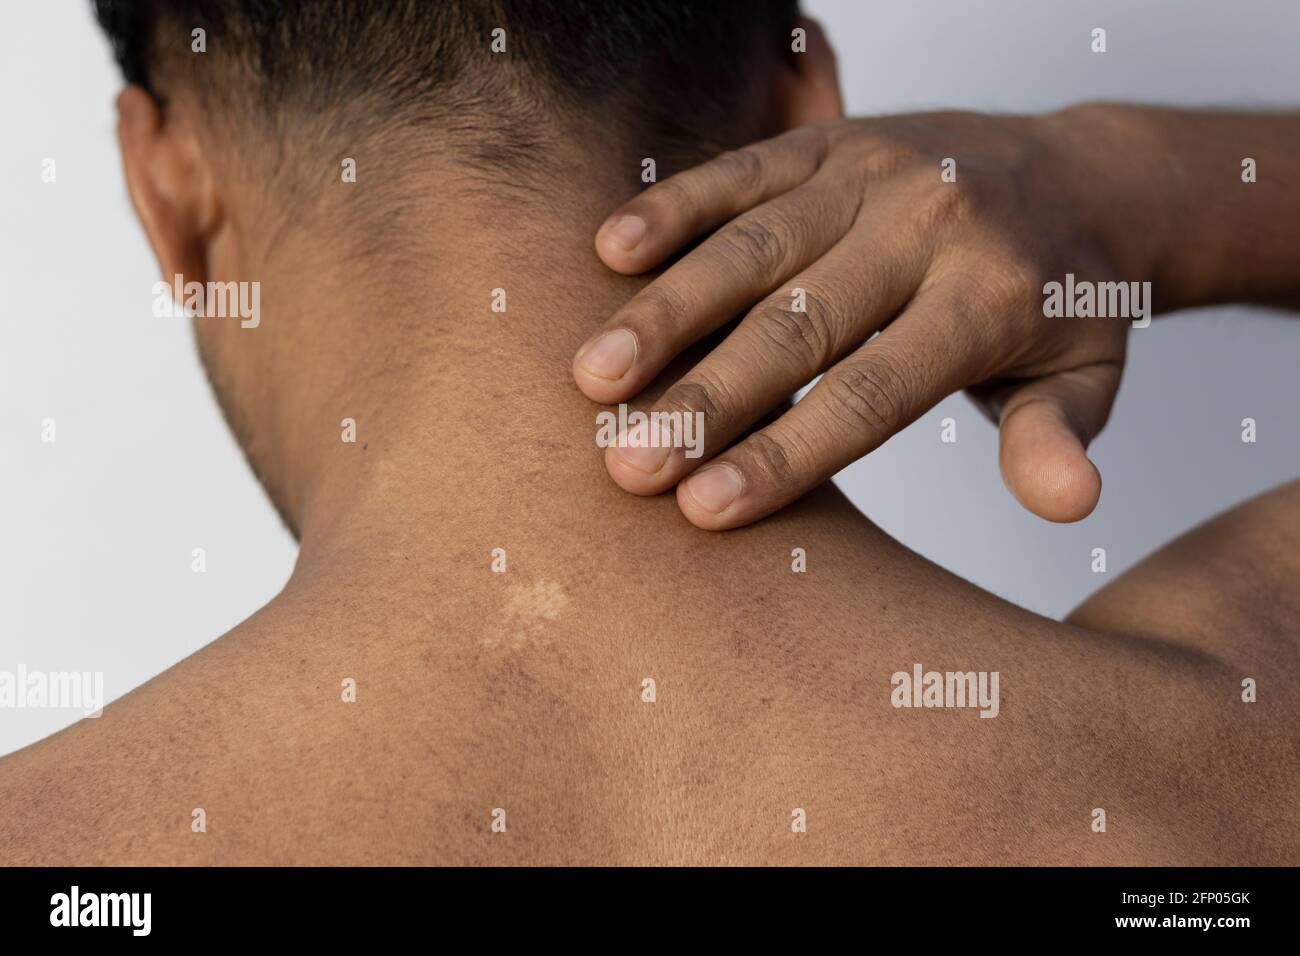 An Indian man showing white scar on his skin, healthcare concept Stock Photo